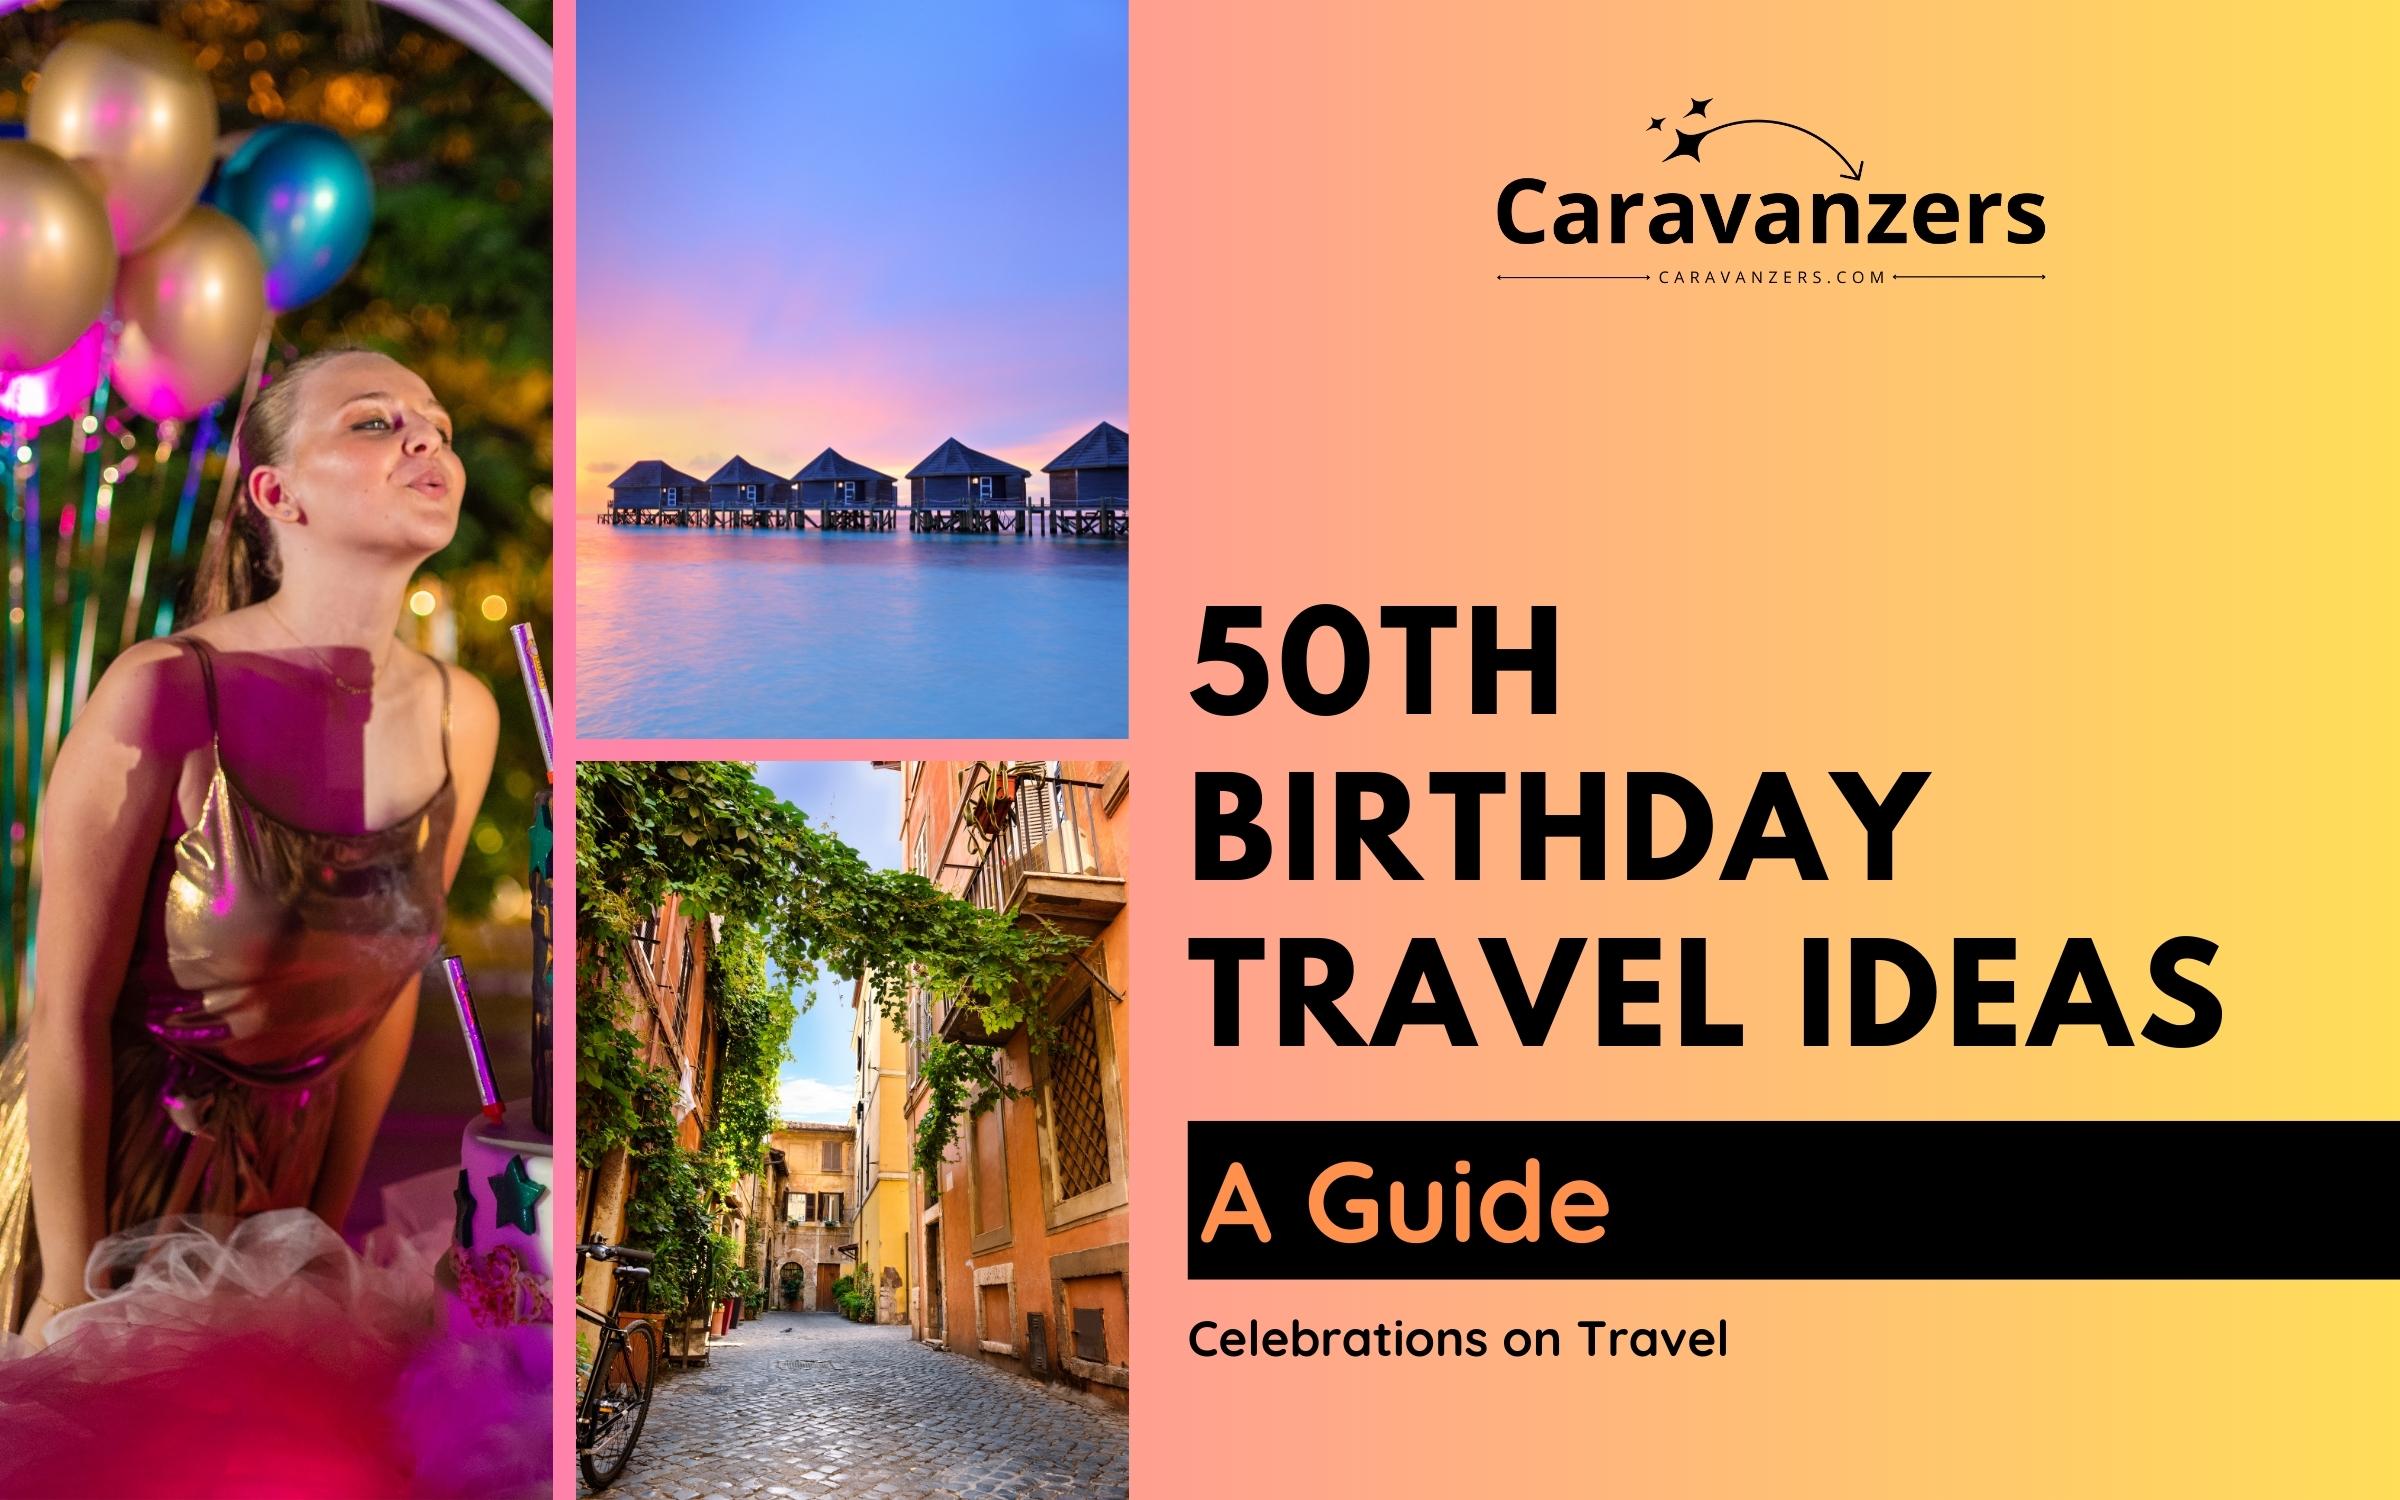 50th Birthday Travel Ideas You Can Start Planning Right Now - Caravanzers